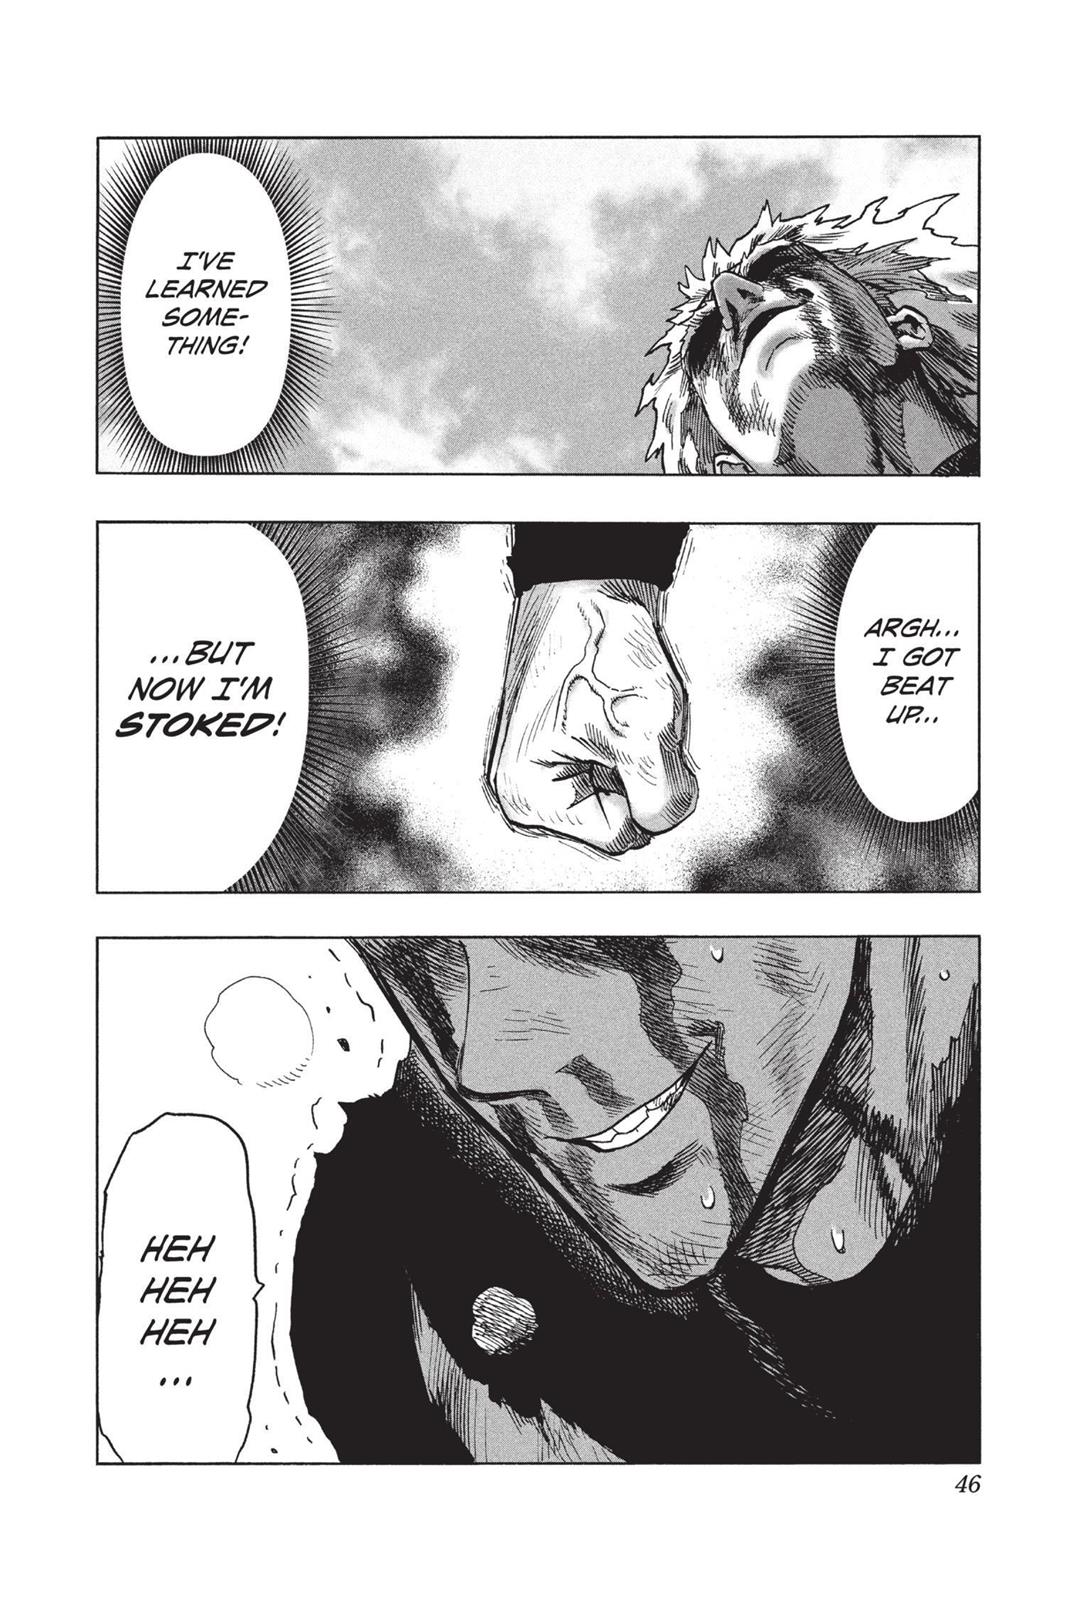 One-Punch Man, Punch 77 image 22